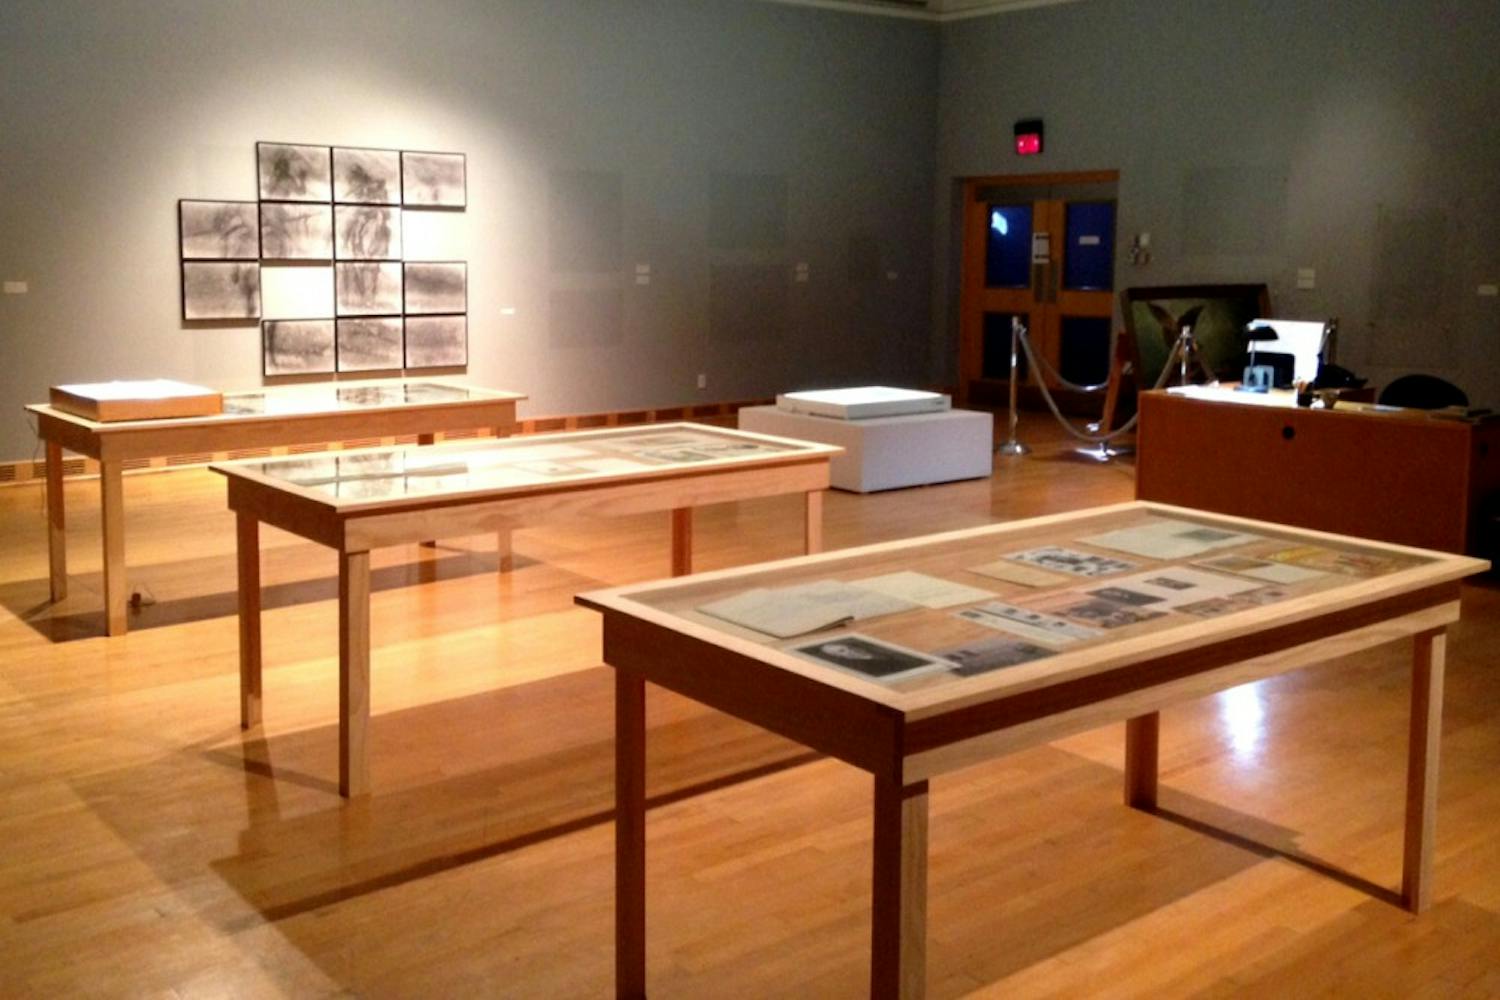 Tables display various stages of the scientific and historical testing processes used to determine a painting's authenticity at the Superfake/The Parley exhibition at the ASU Art Museum on Saturday, Jan. 9, 2016. 